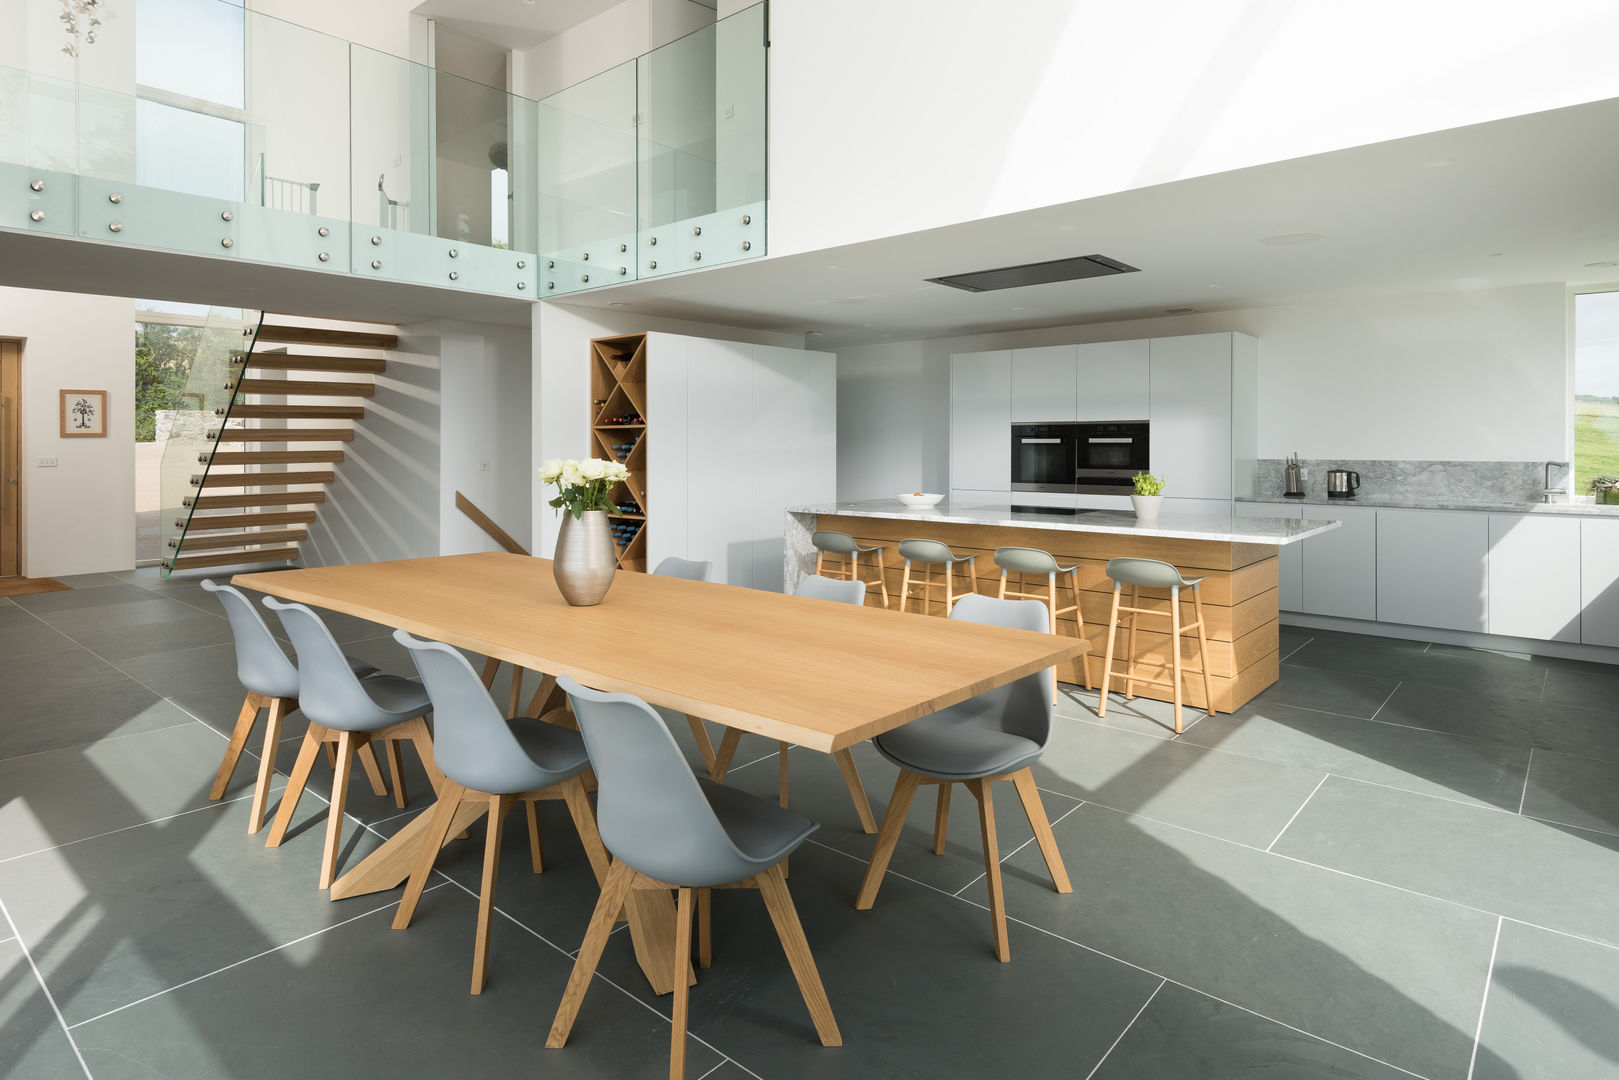 Contemporary Replacement Dwelling, Cubert, Laurence Associates Laurence Associates Sala da pranzo moderna kitchen,dining room,open plan,open space kitchen,dining table,dining chairs,mezzanine,stairs,white kitchen,flooring,modern,contemporary